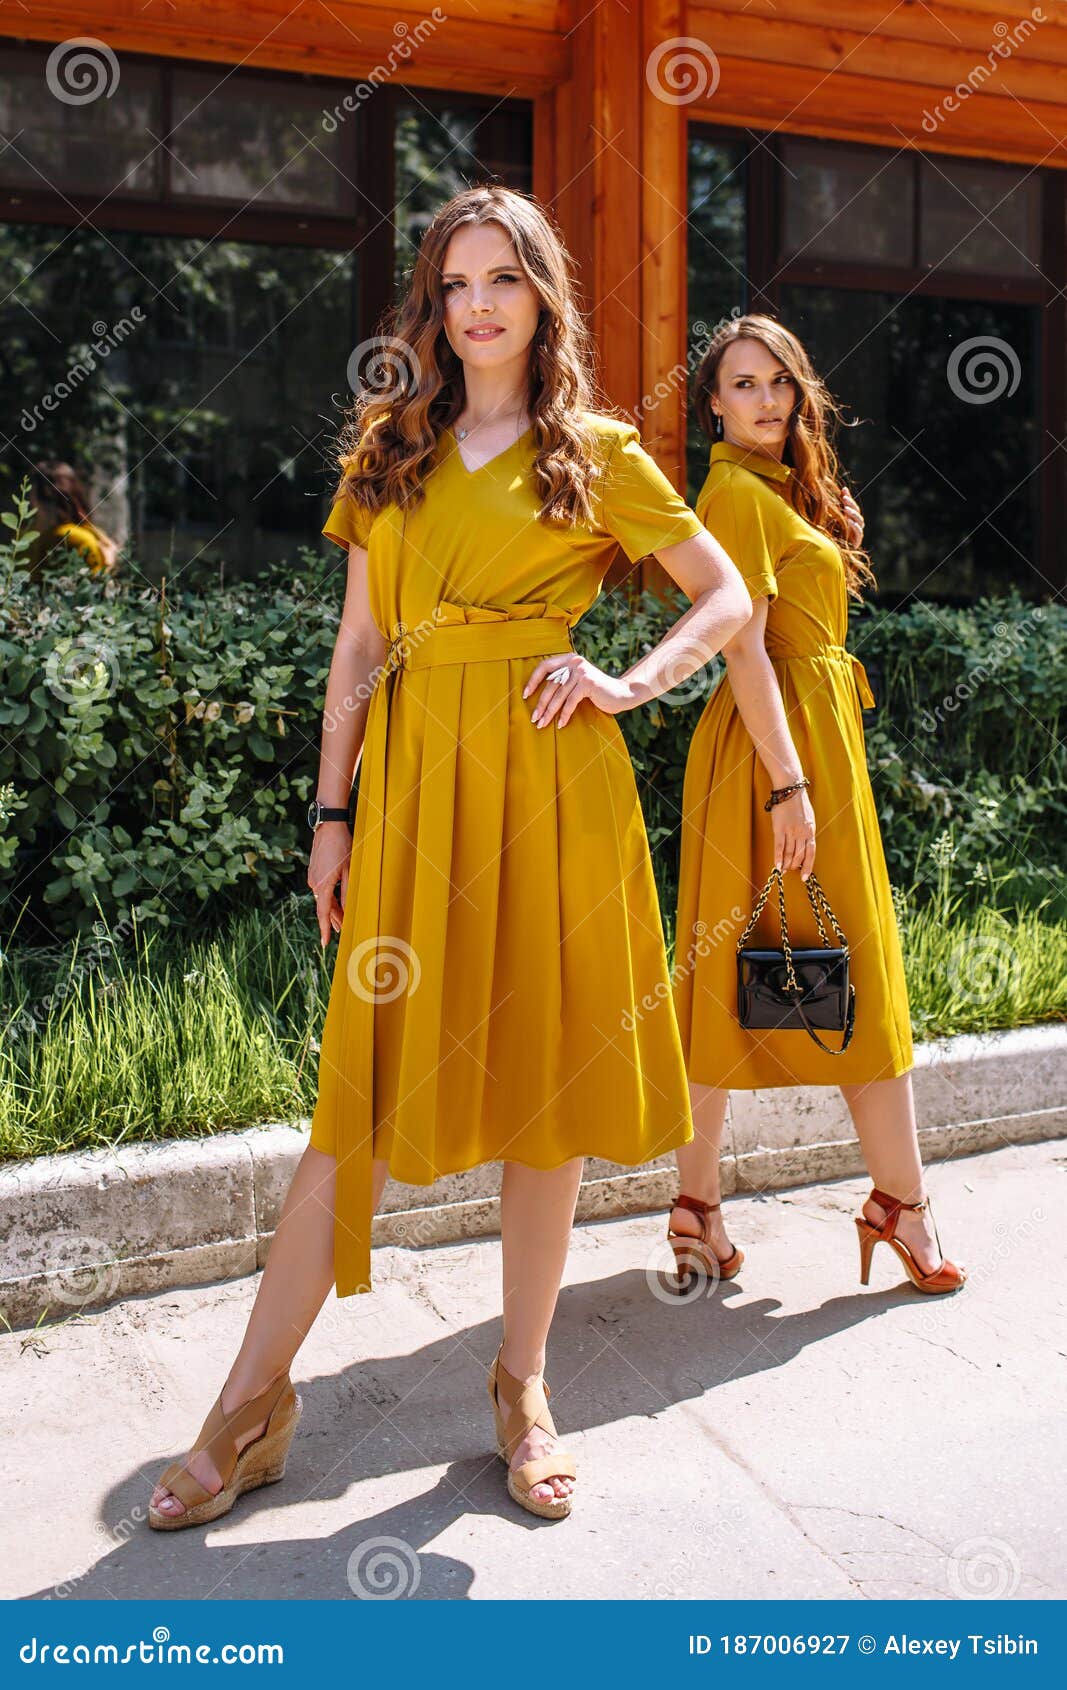 Two Models on the Street in Mustard Colored Dresses Stock Image - Image ...